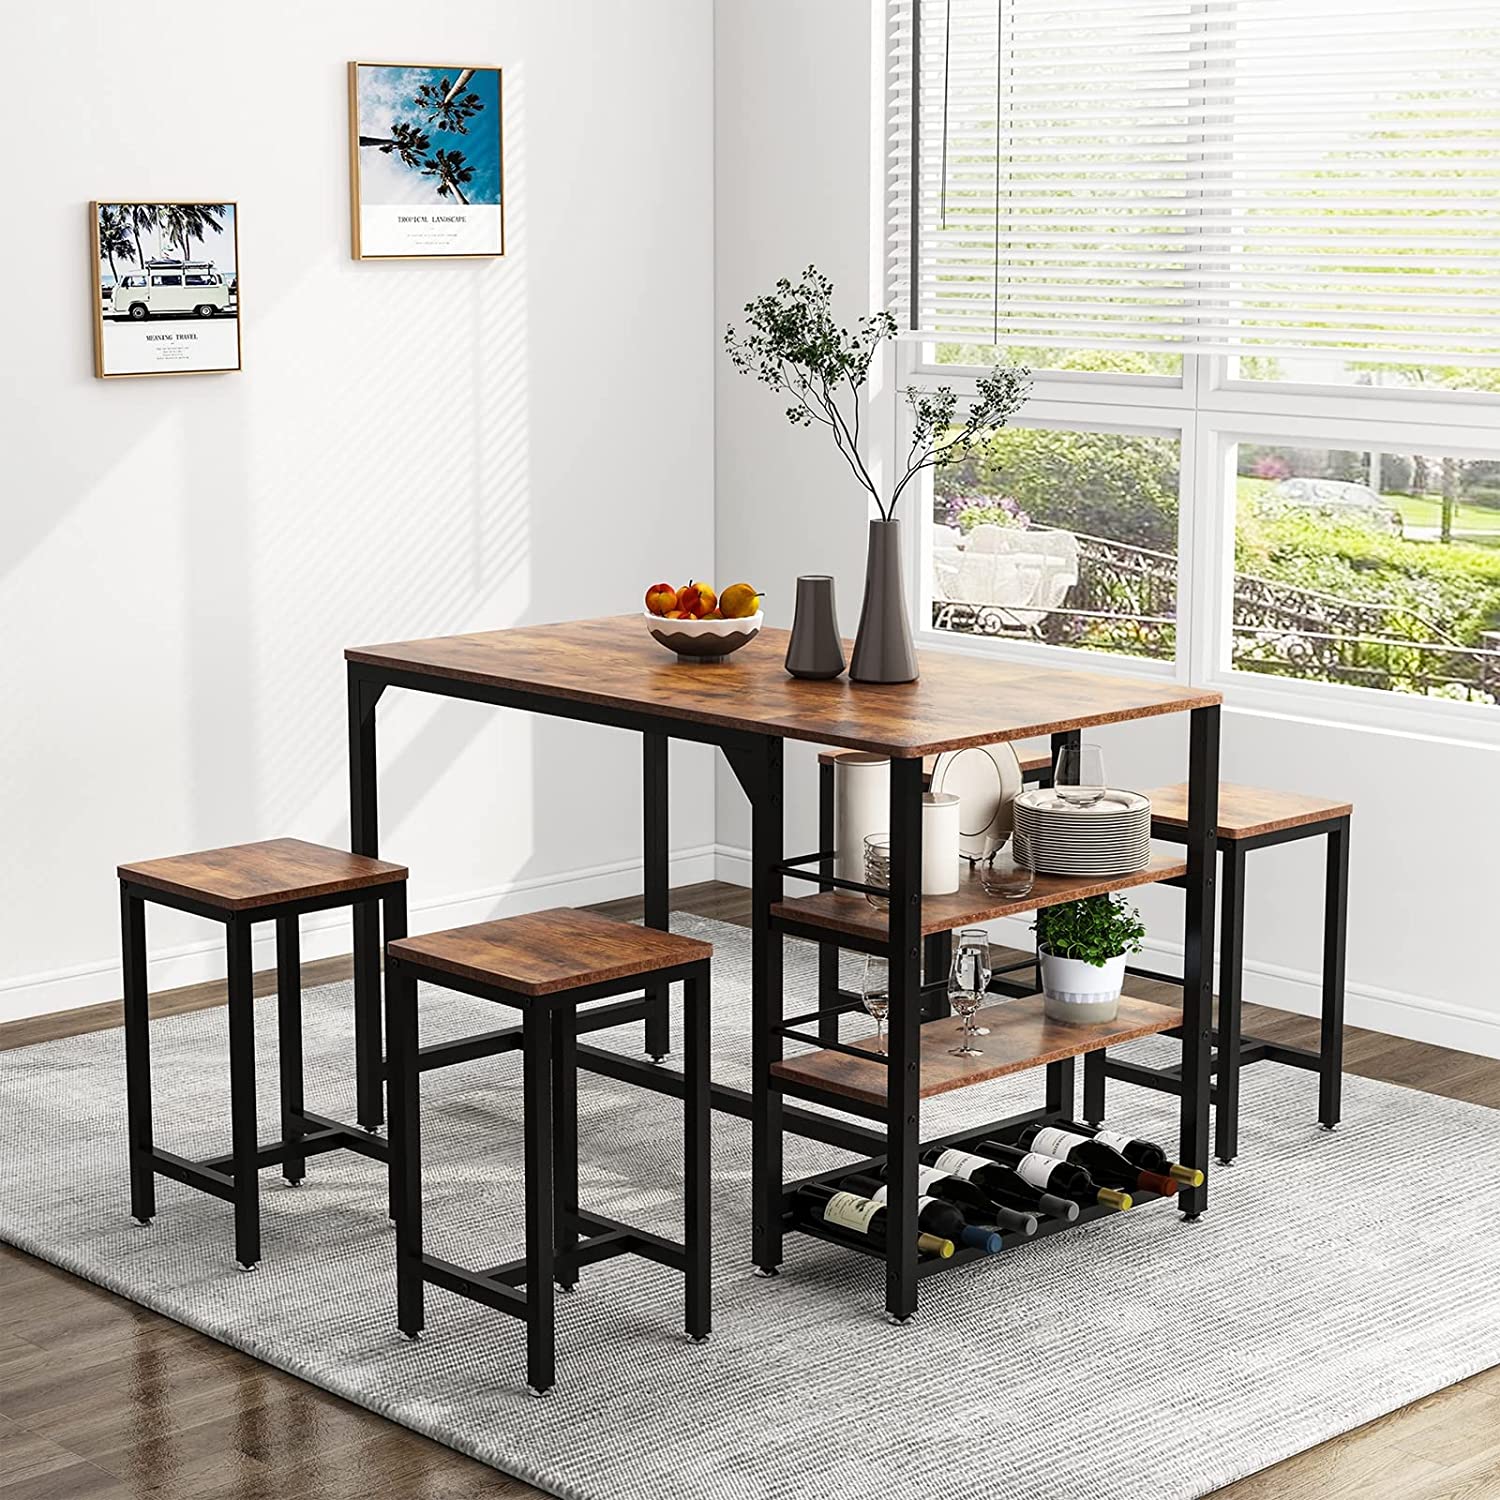 50896 - Rxicdeo Dining Table Set for 4 USA